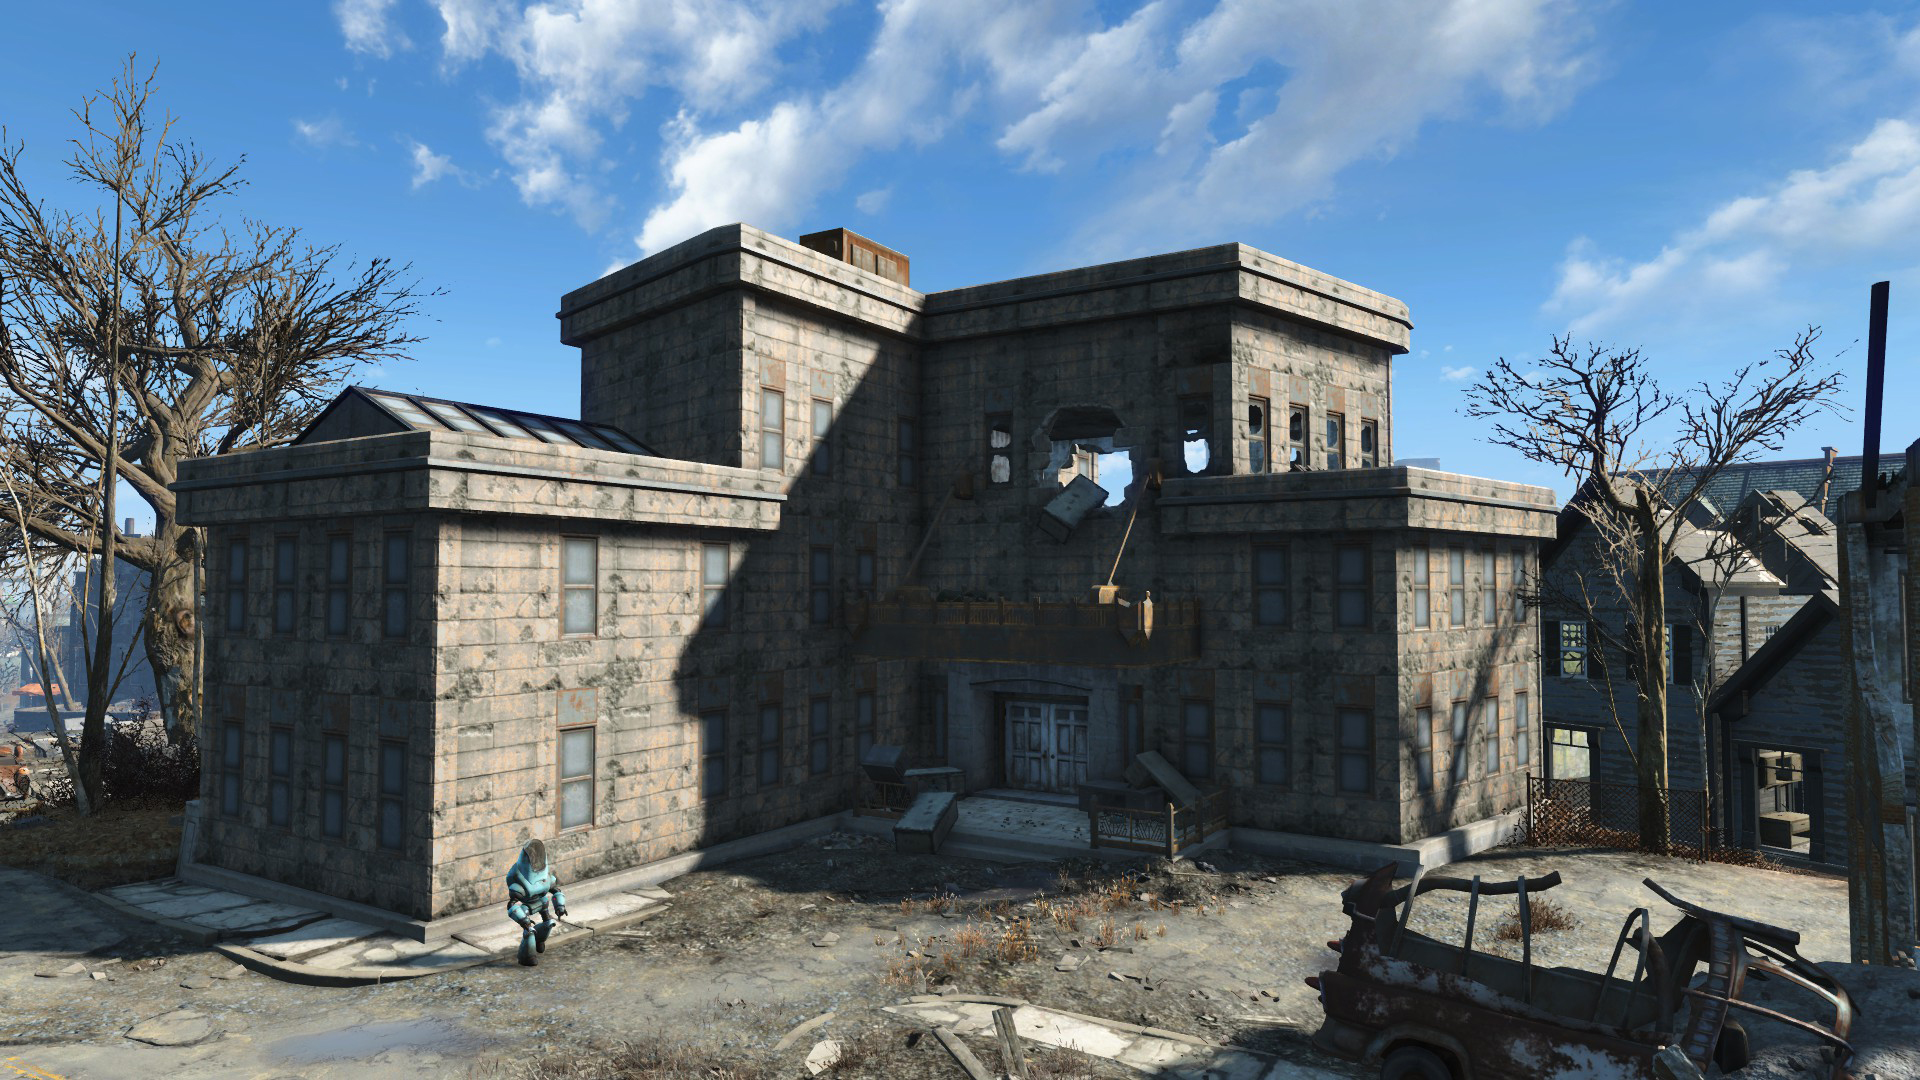 fallout 4 buildings not loading